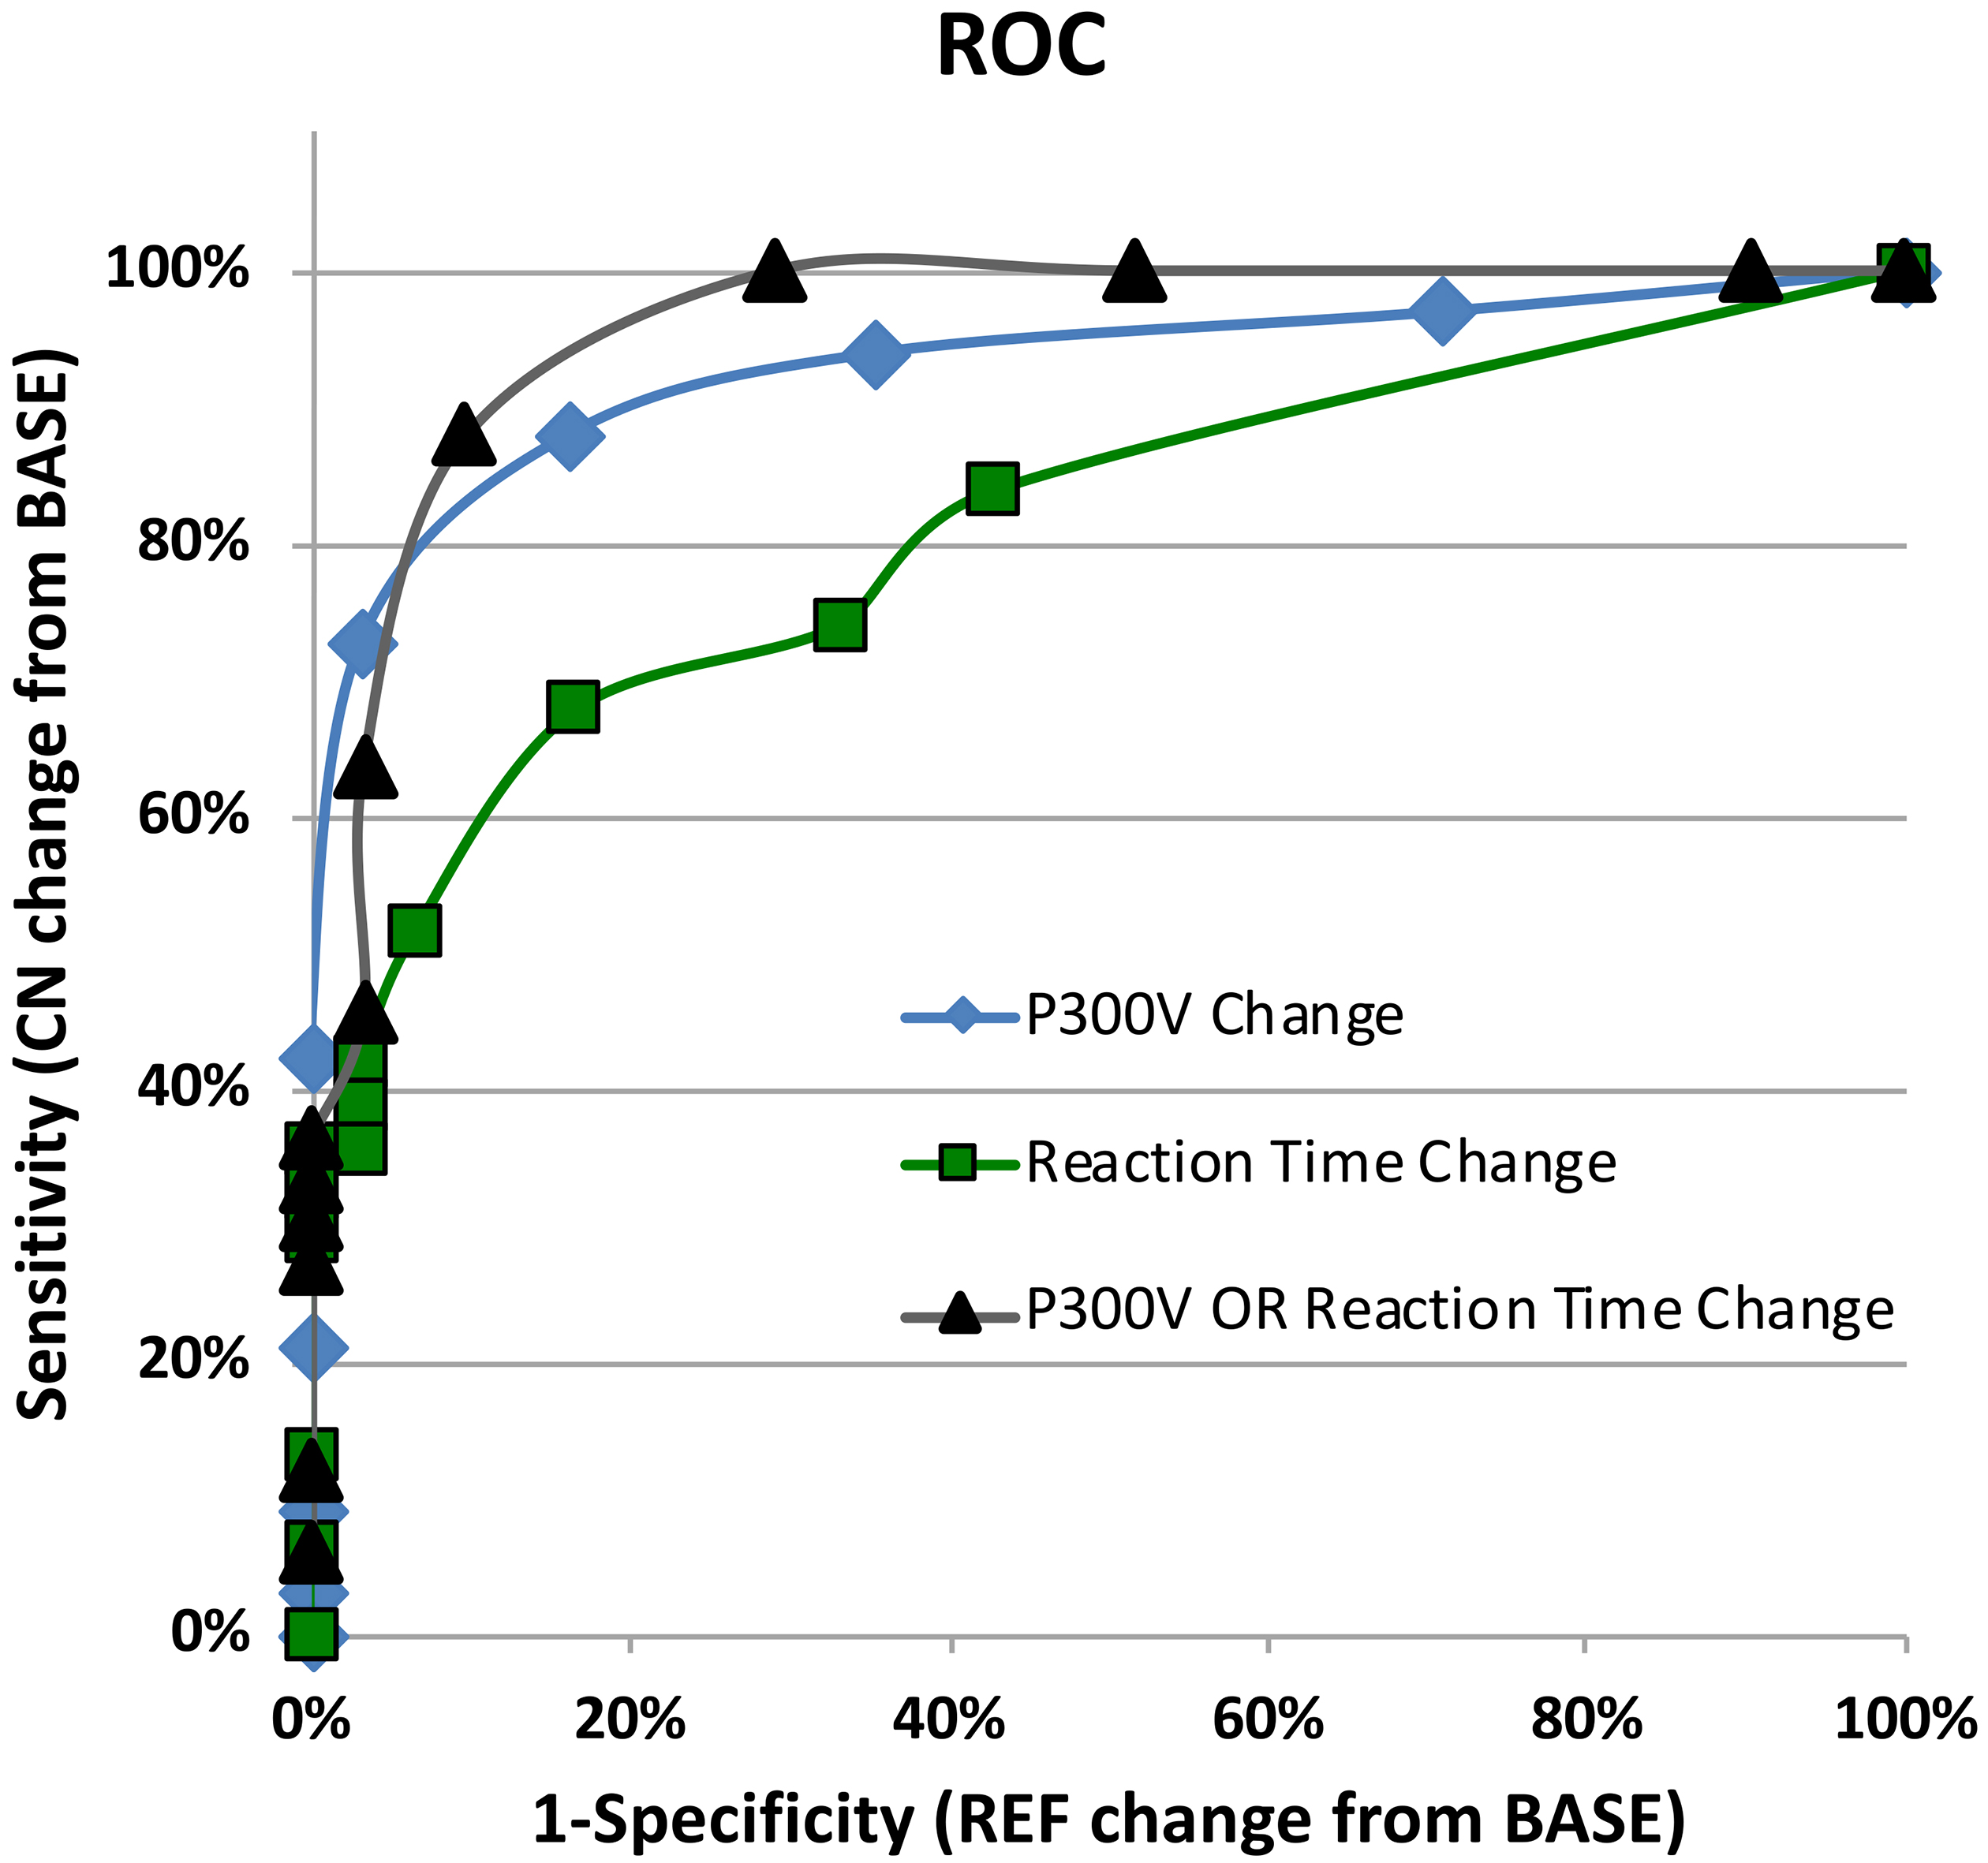 ROC curves comparing reaction time and/or P300 voltage changes from baseline for concussed group versus non-concussed reference group.